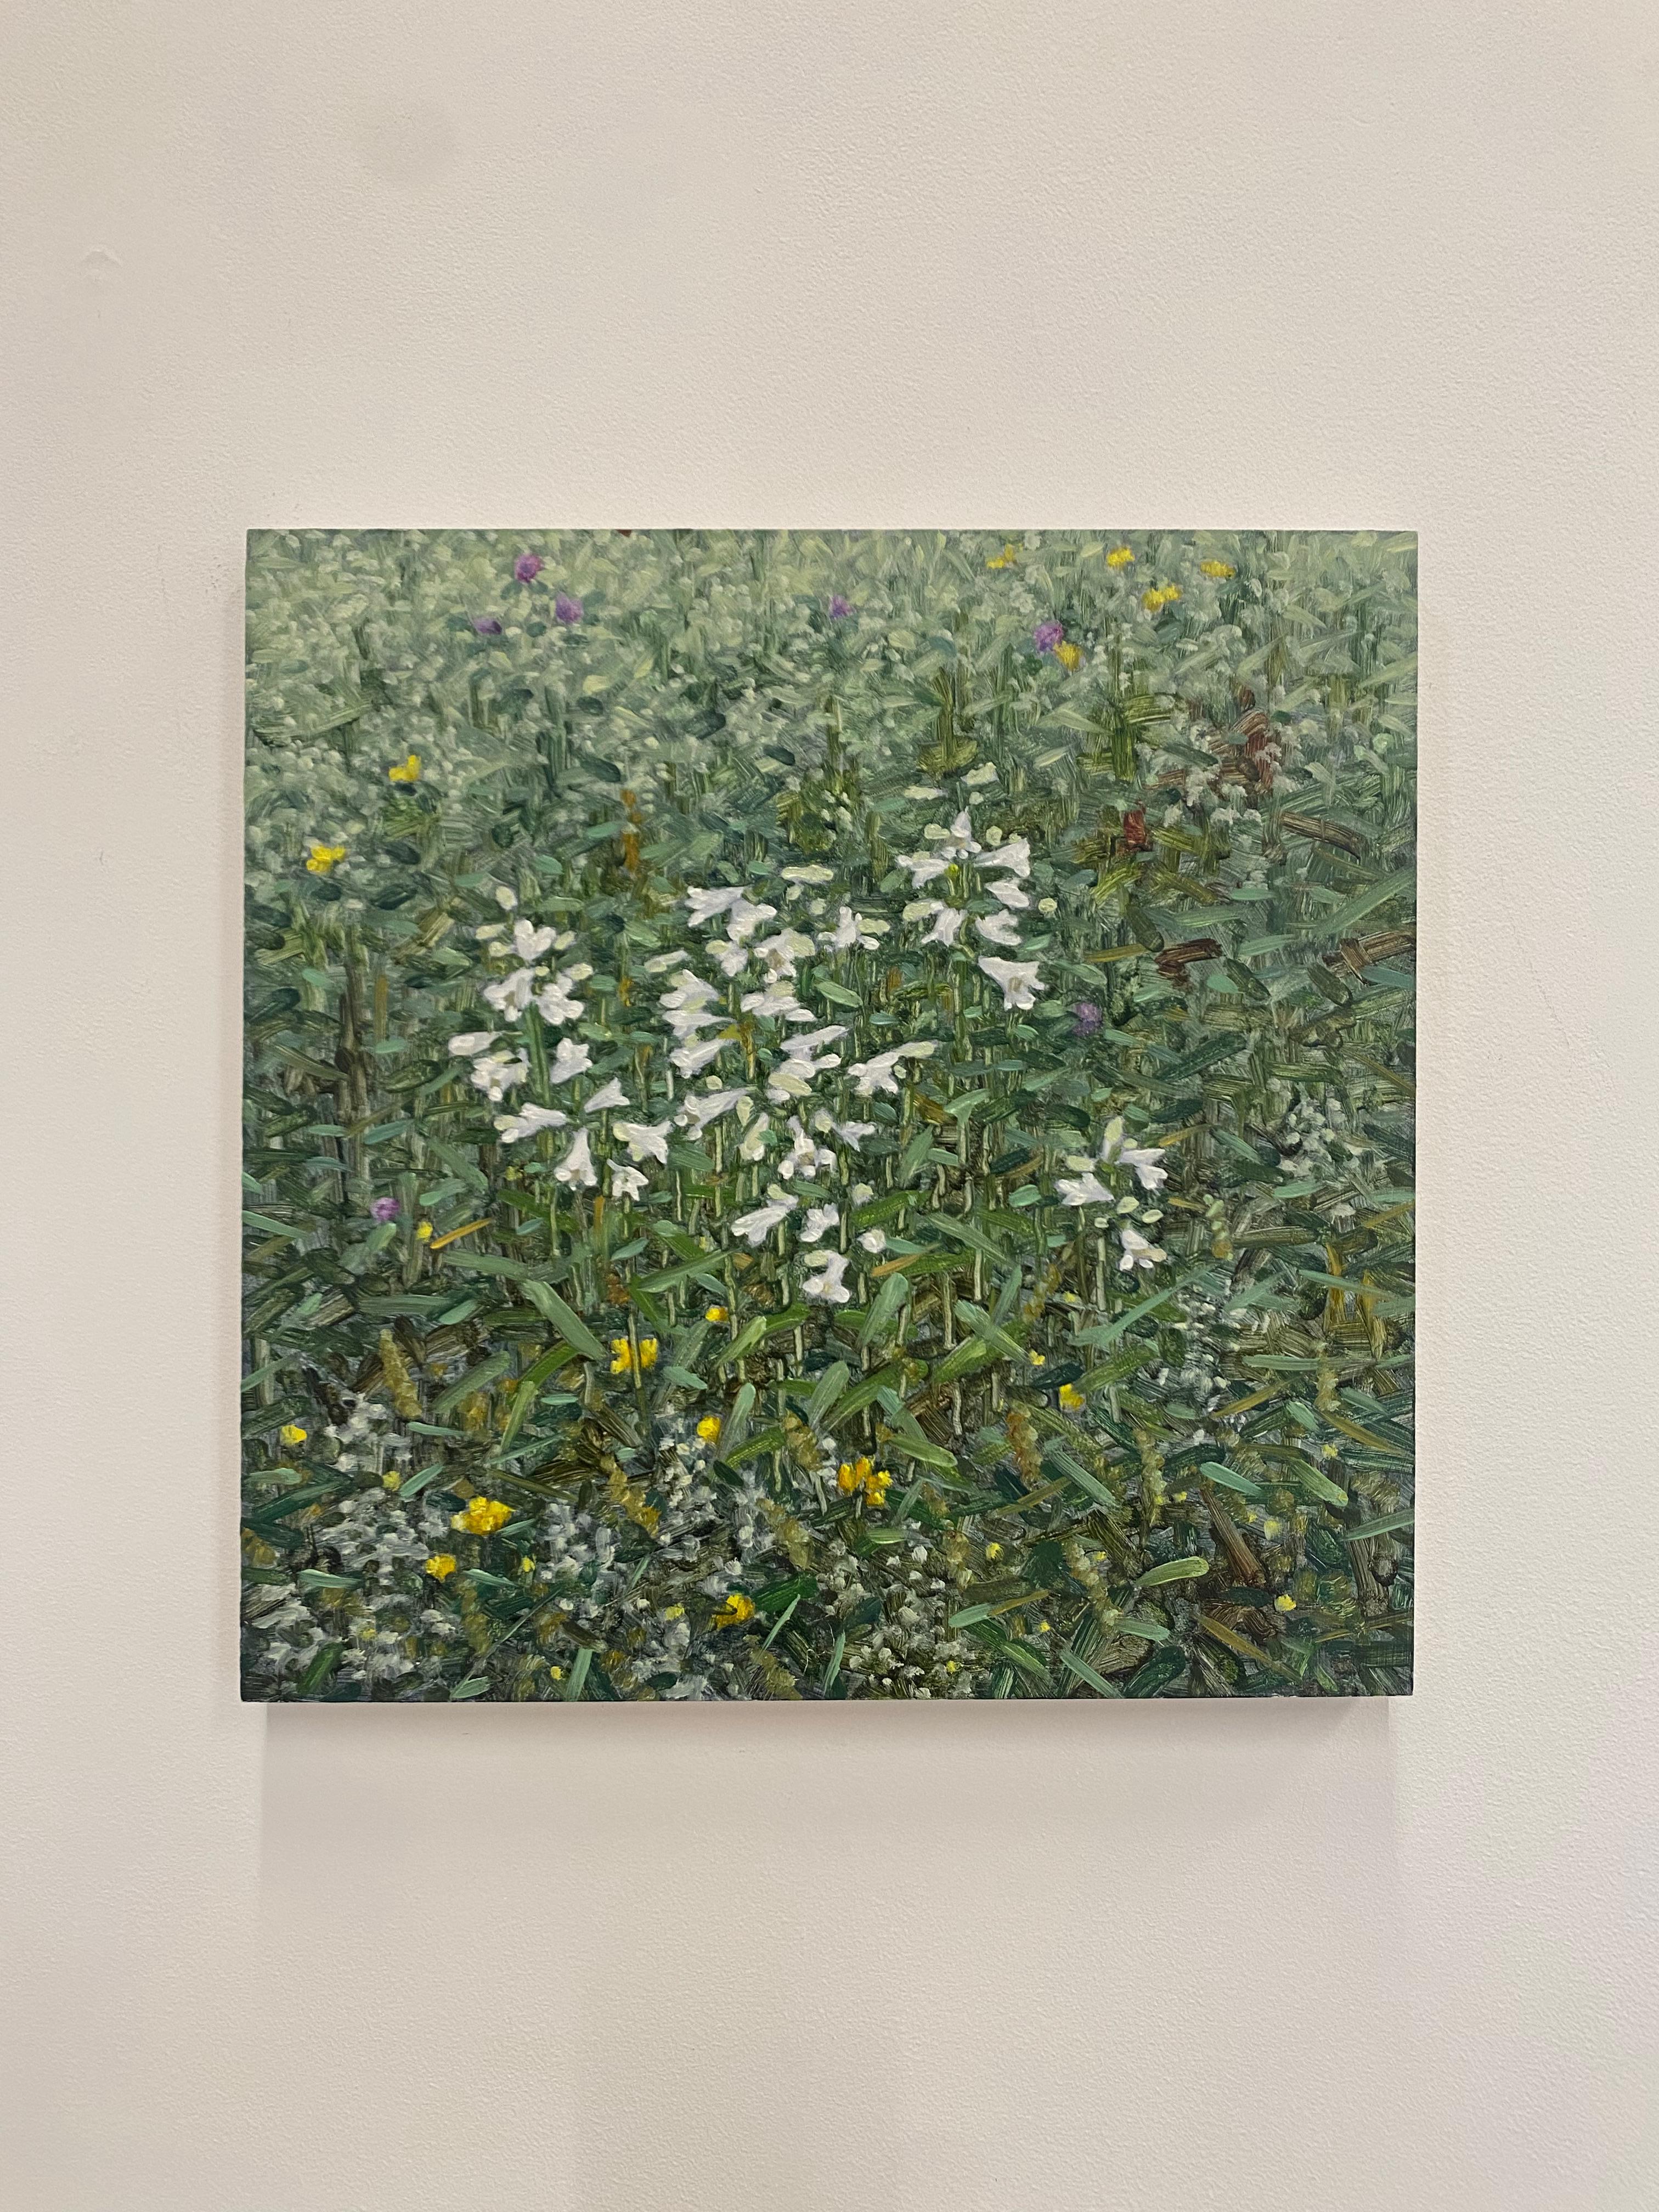 A peaceful outdoor scene with a grassy field with white and yellow flowers, beautifully capturing the idyllic feel of a field of wildflowers in late June. Signed, dated and titled on verso.

The paintings of Thomas Sarrantonio seek to mediate